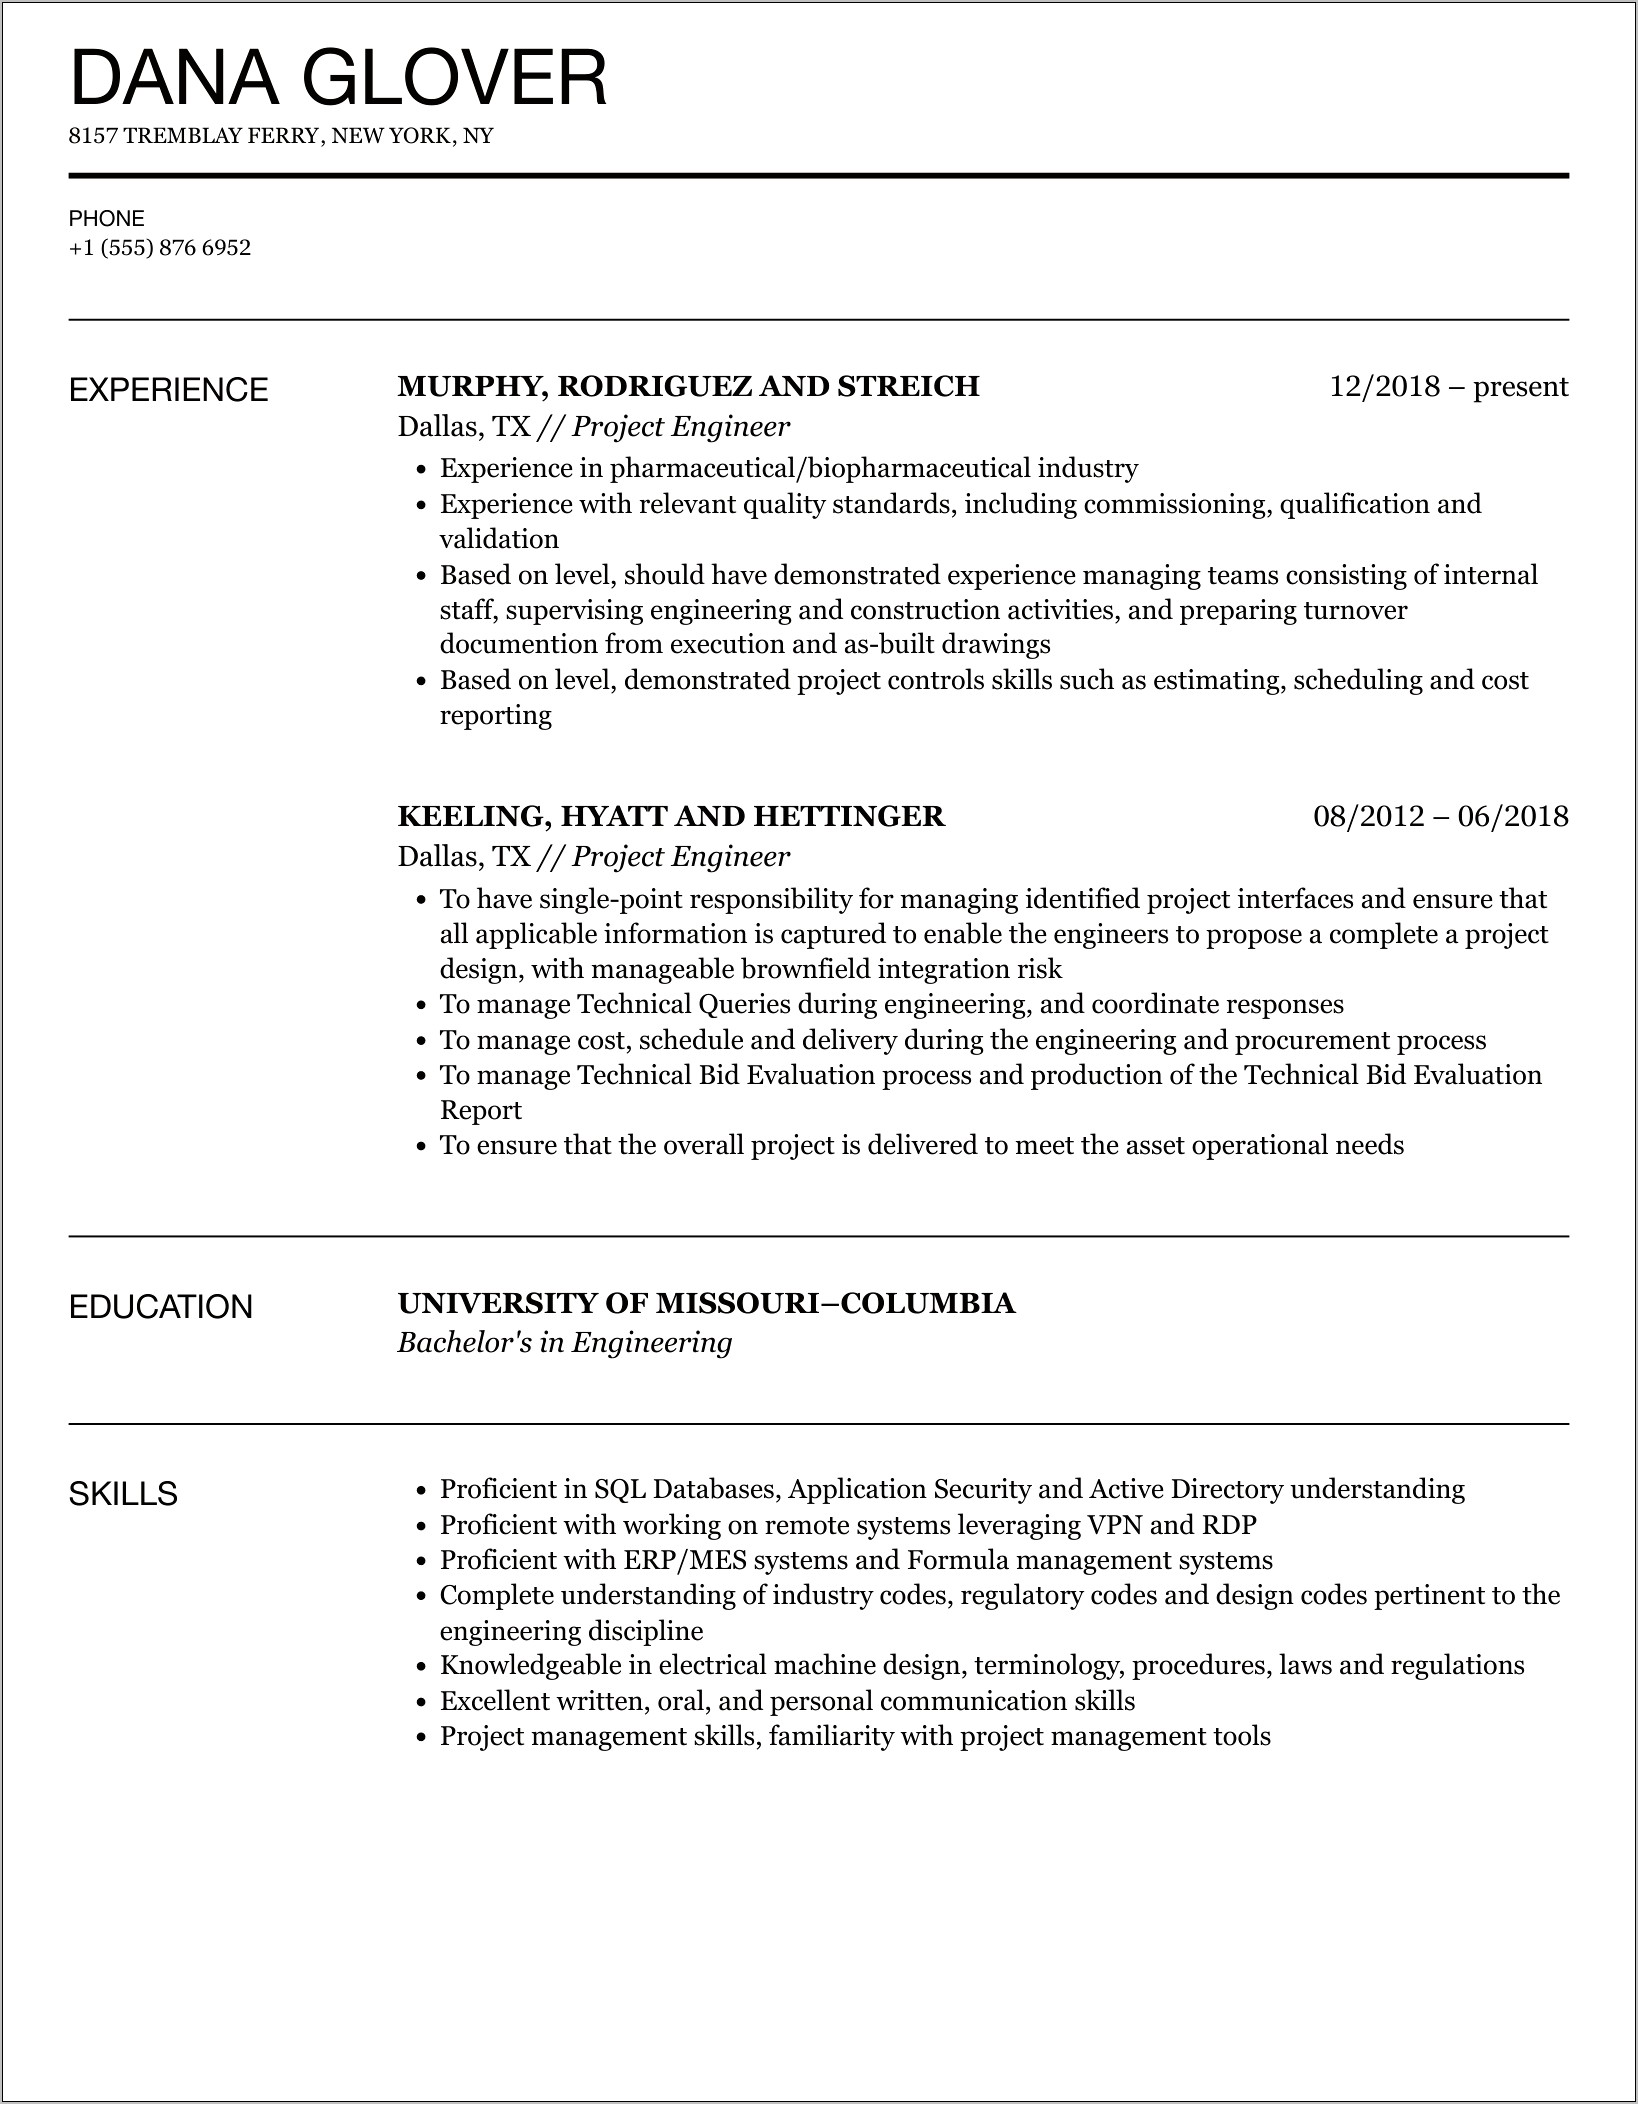 Electrical Project Engineer Resume Example